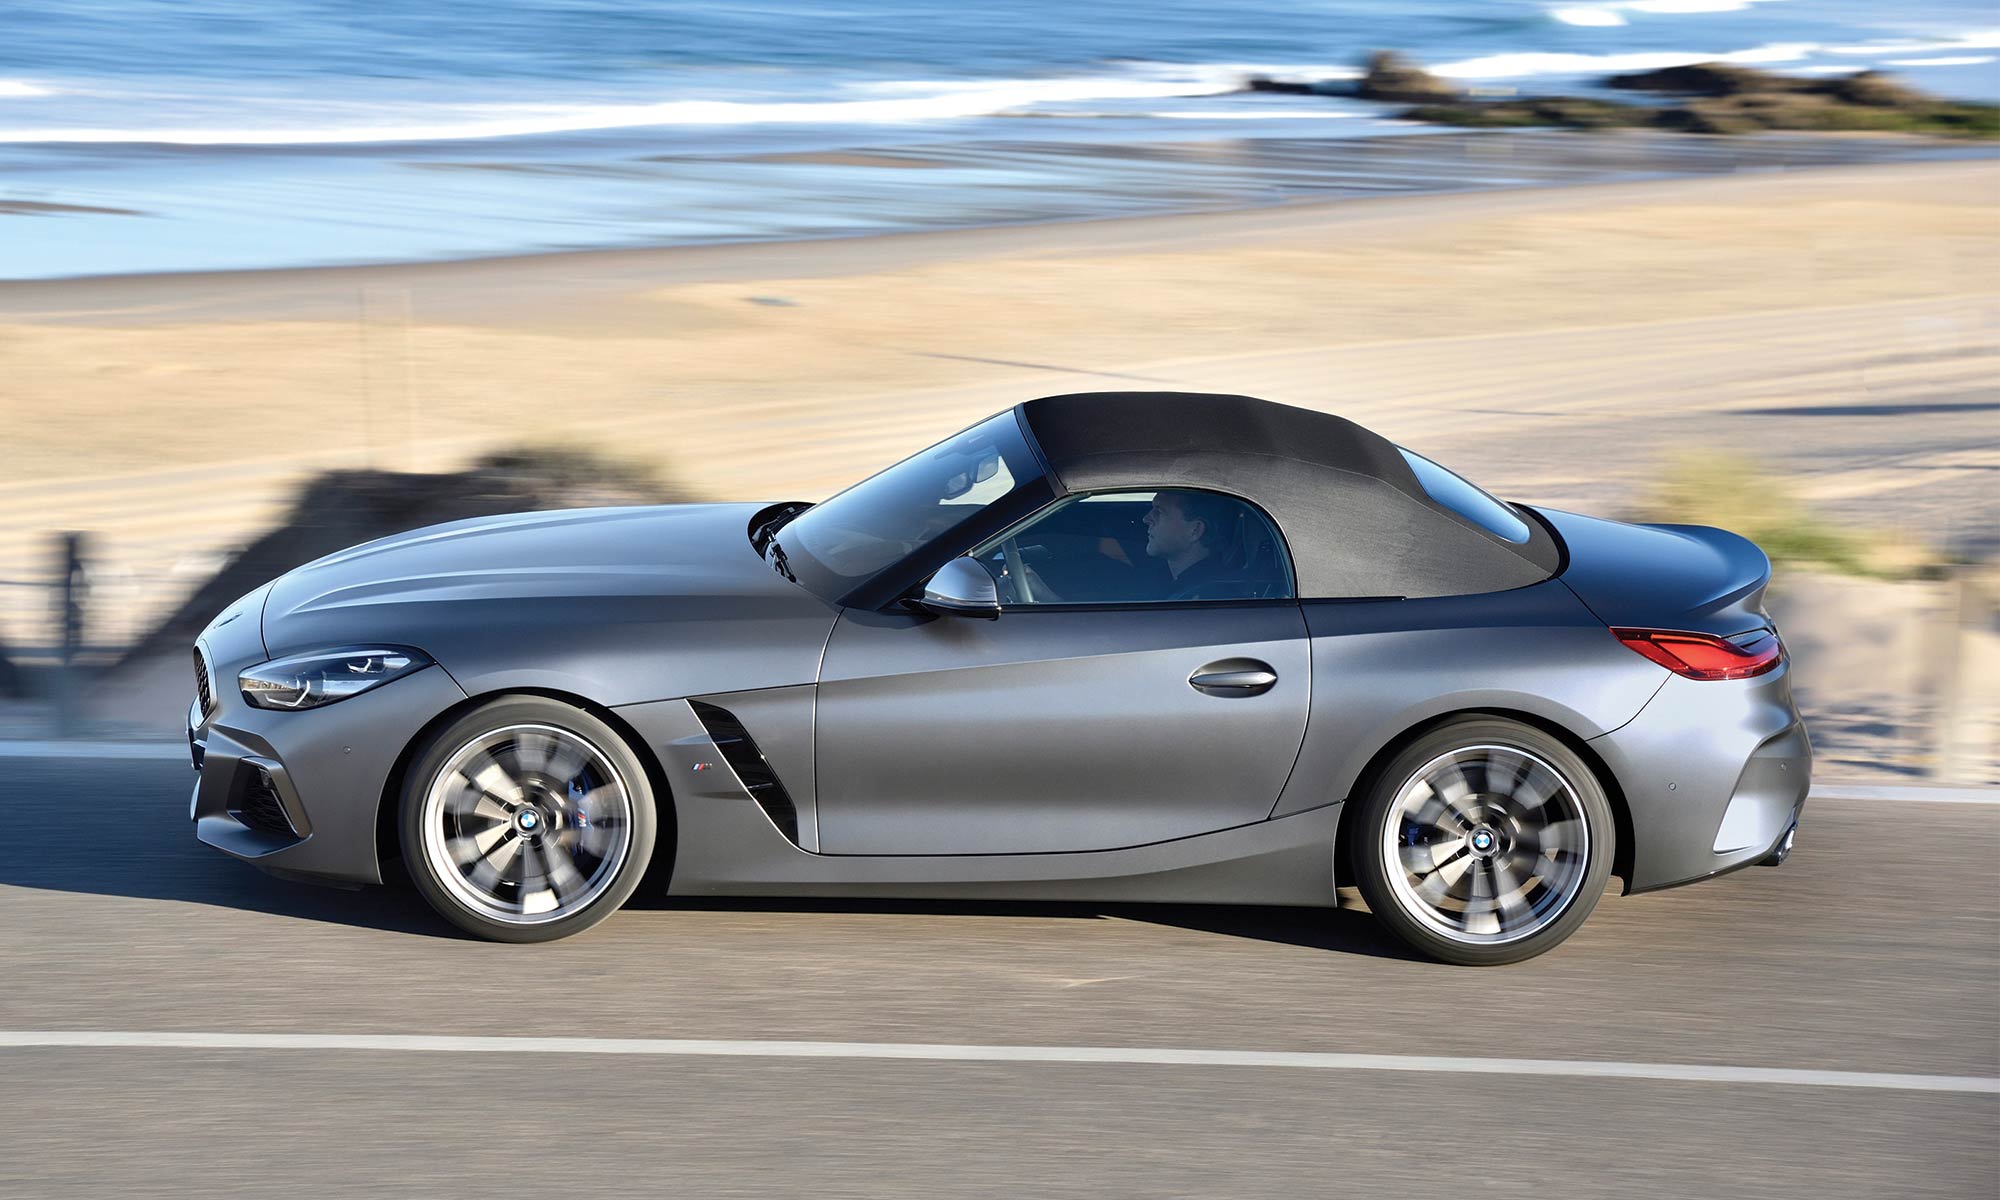 Review of The New BMW Z4 Roadster